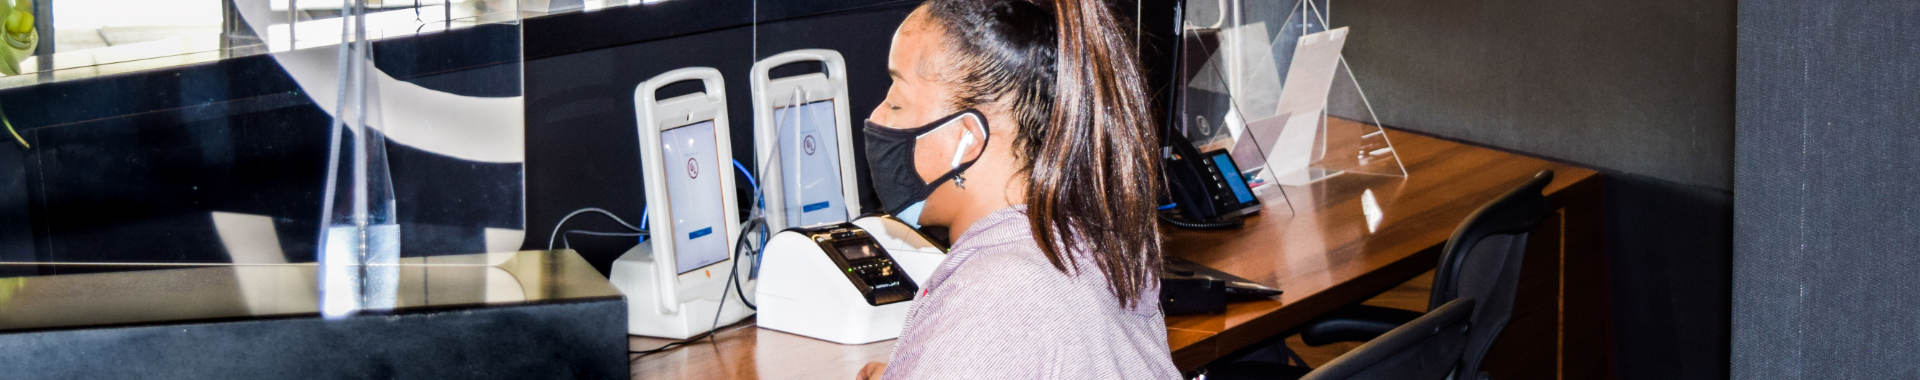 A woman wearing a mask greets a visitor wearing a mask at the UL front desk